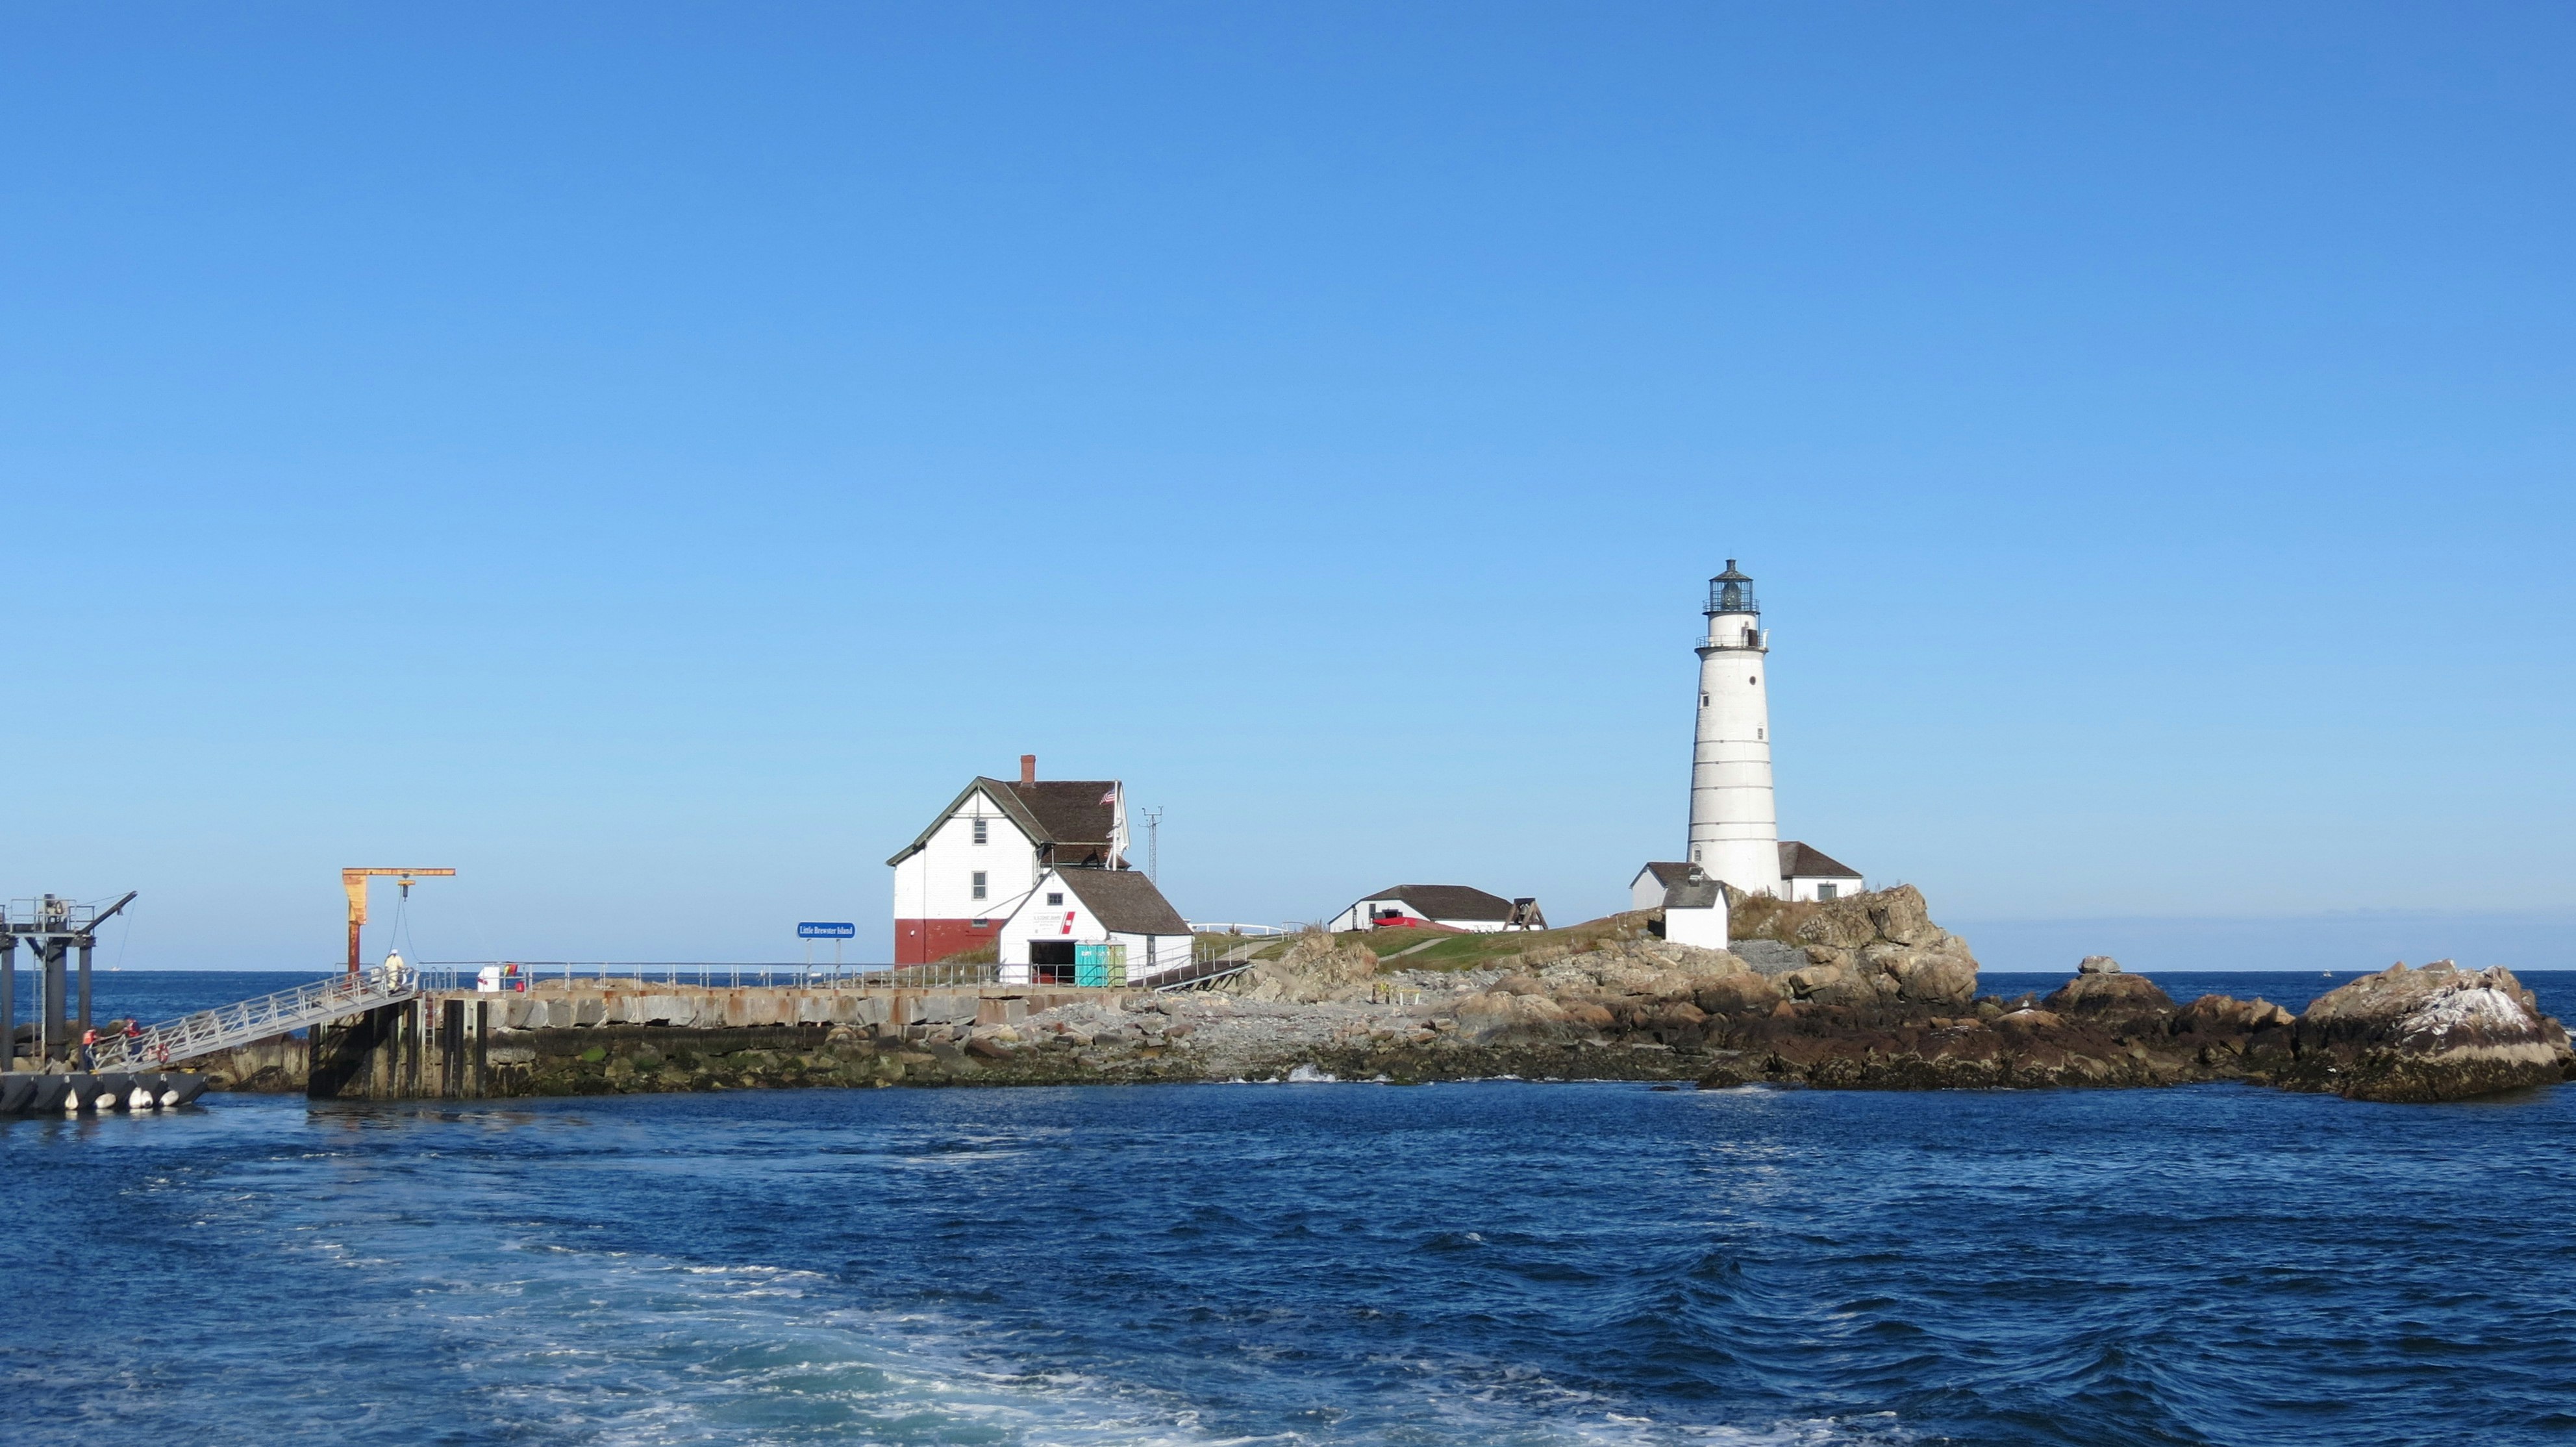 America's oldest lighthouse is on Little Brewster Island. Image by Robert Linsdell / CC BY 2.0